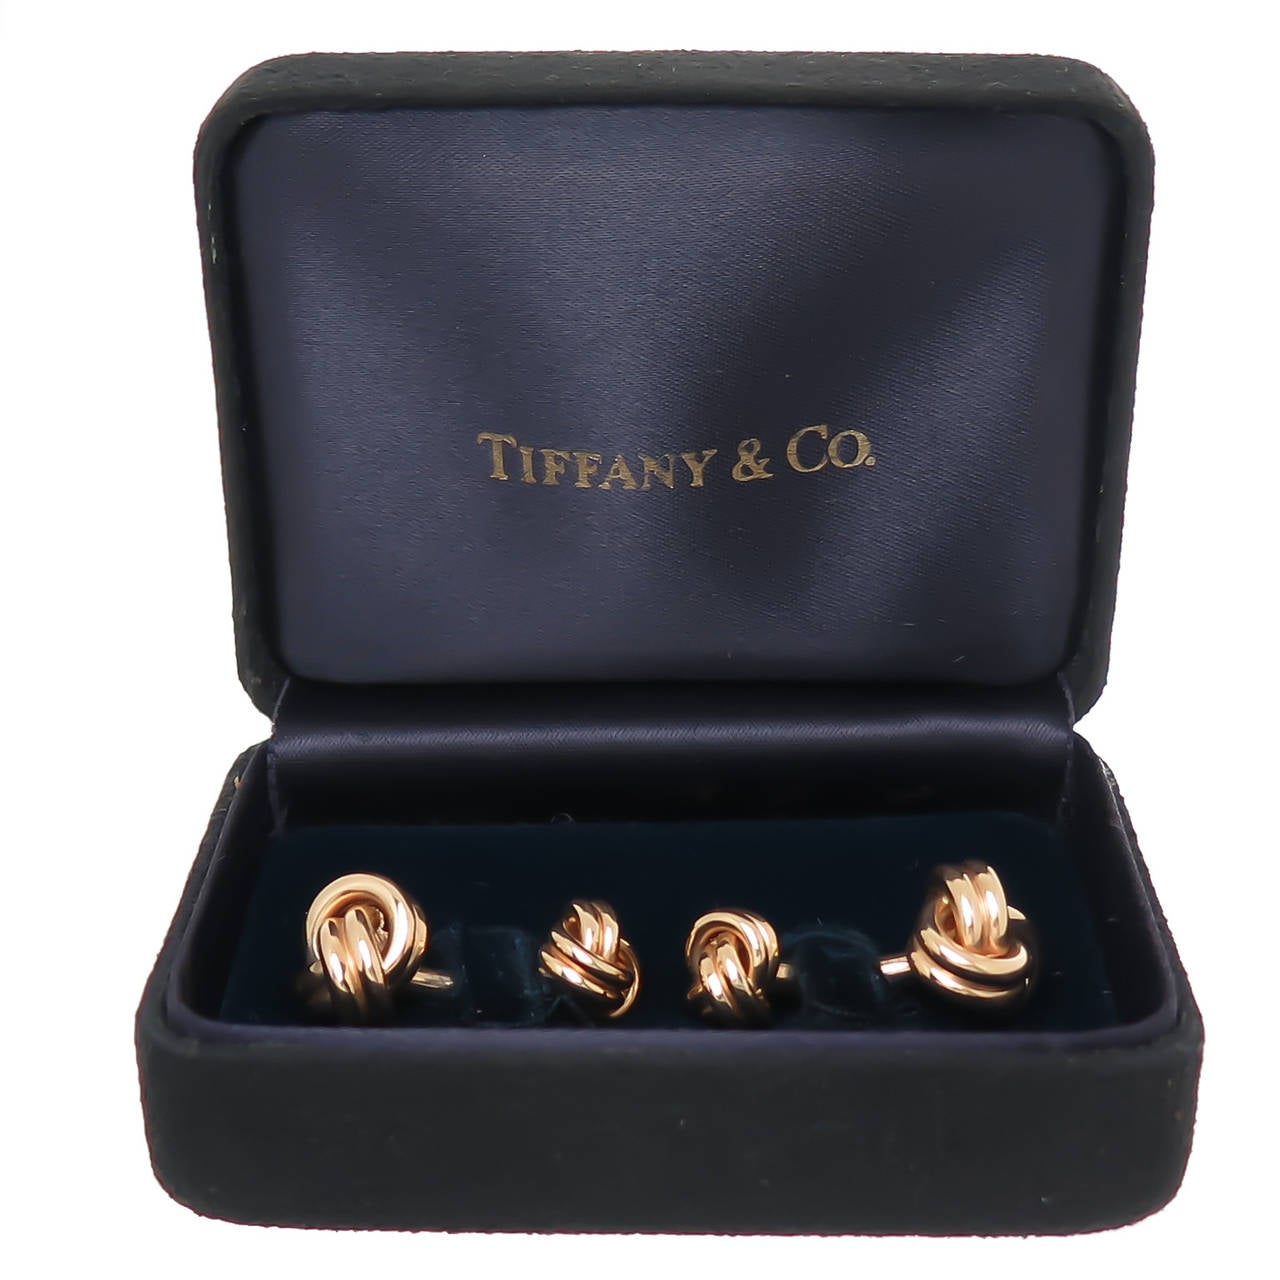 Circa 1990 Tiffany & Co. Tradition 14K Yellow Gold Knot Cufflinks. Very sturdy with Good Weight and original Presentation Box.